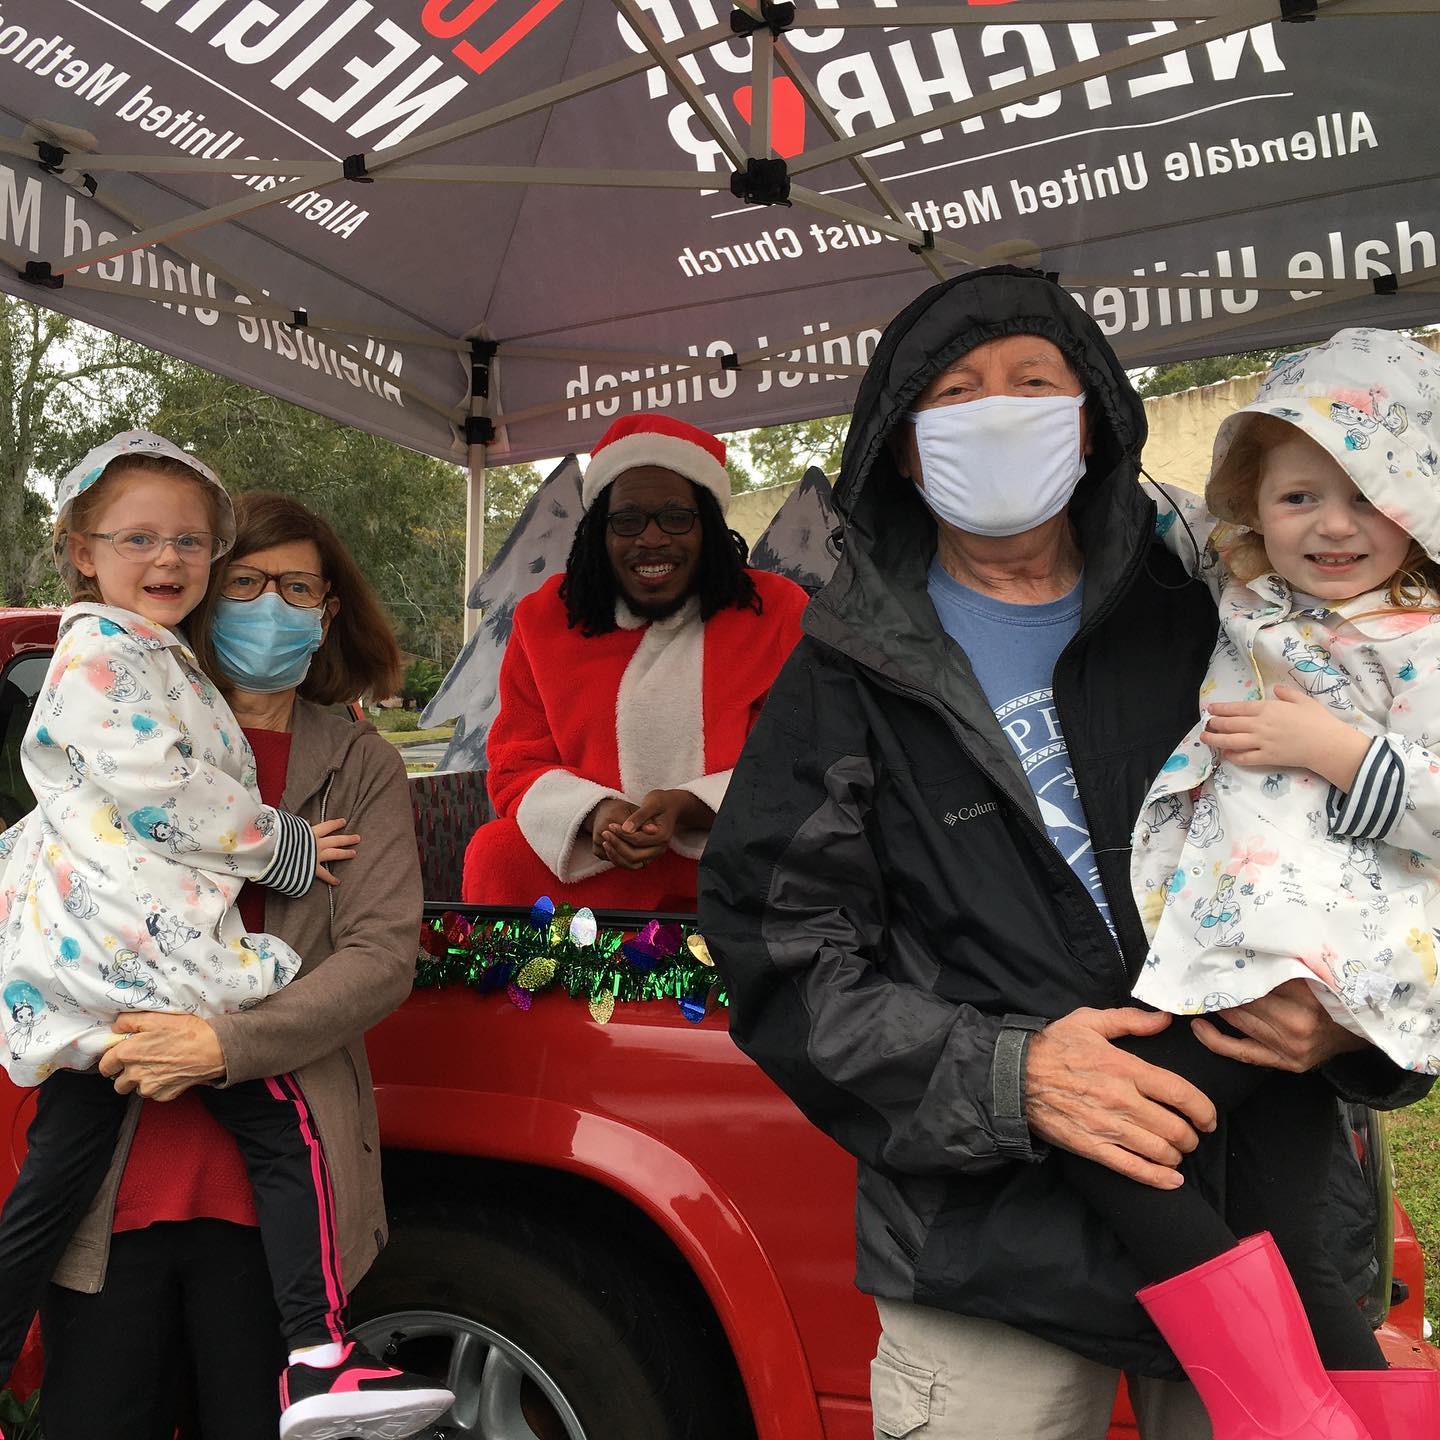 A photo of two adults, each holding a small child posing with Santa who is sitting in the back of a red pickup truck surrounded by Christmas decorations. It looks cold and rainy, but everyone is smiling gleefully. The group is sheltered from the rain by a pop up canopy tent.